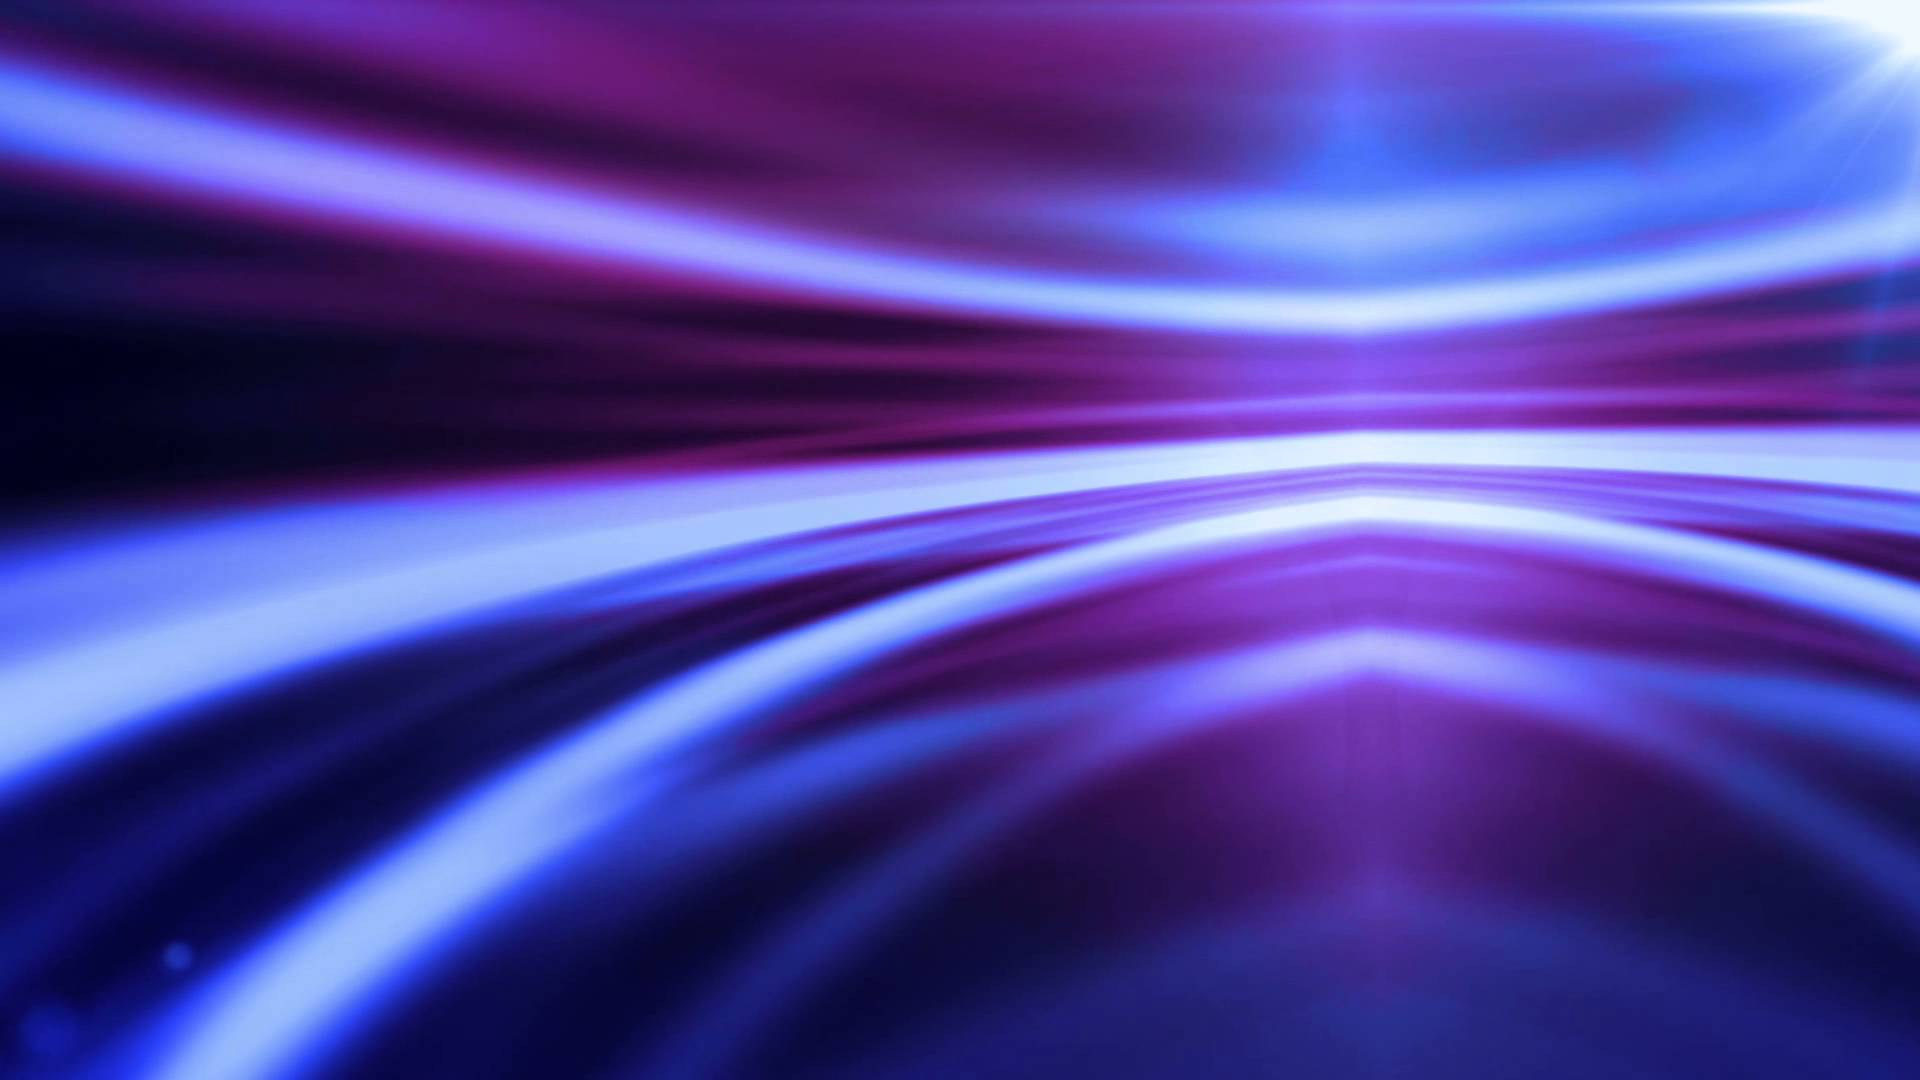 Abstract background photo